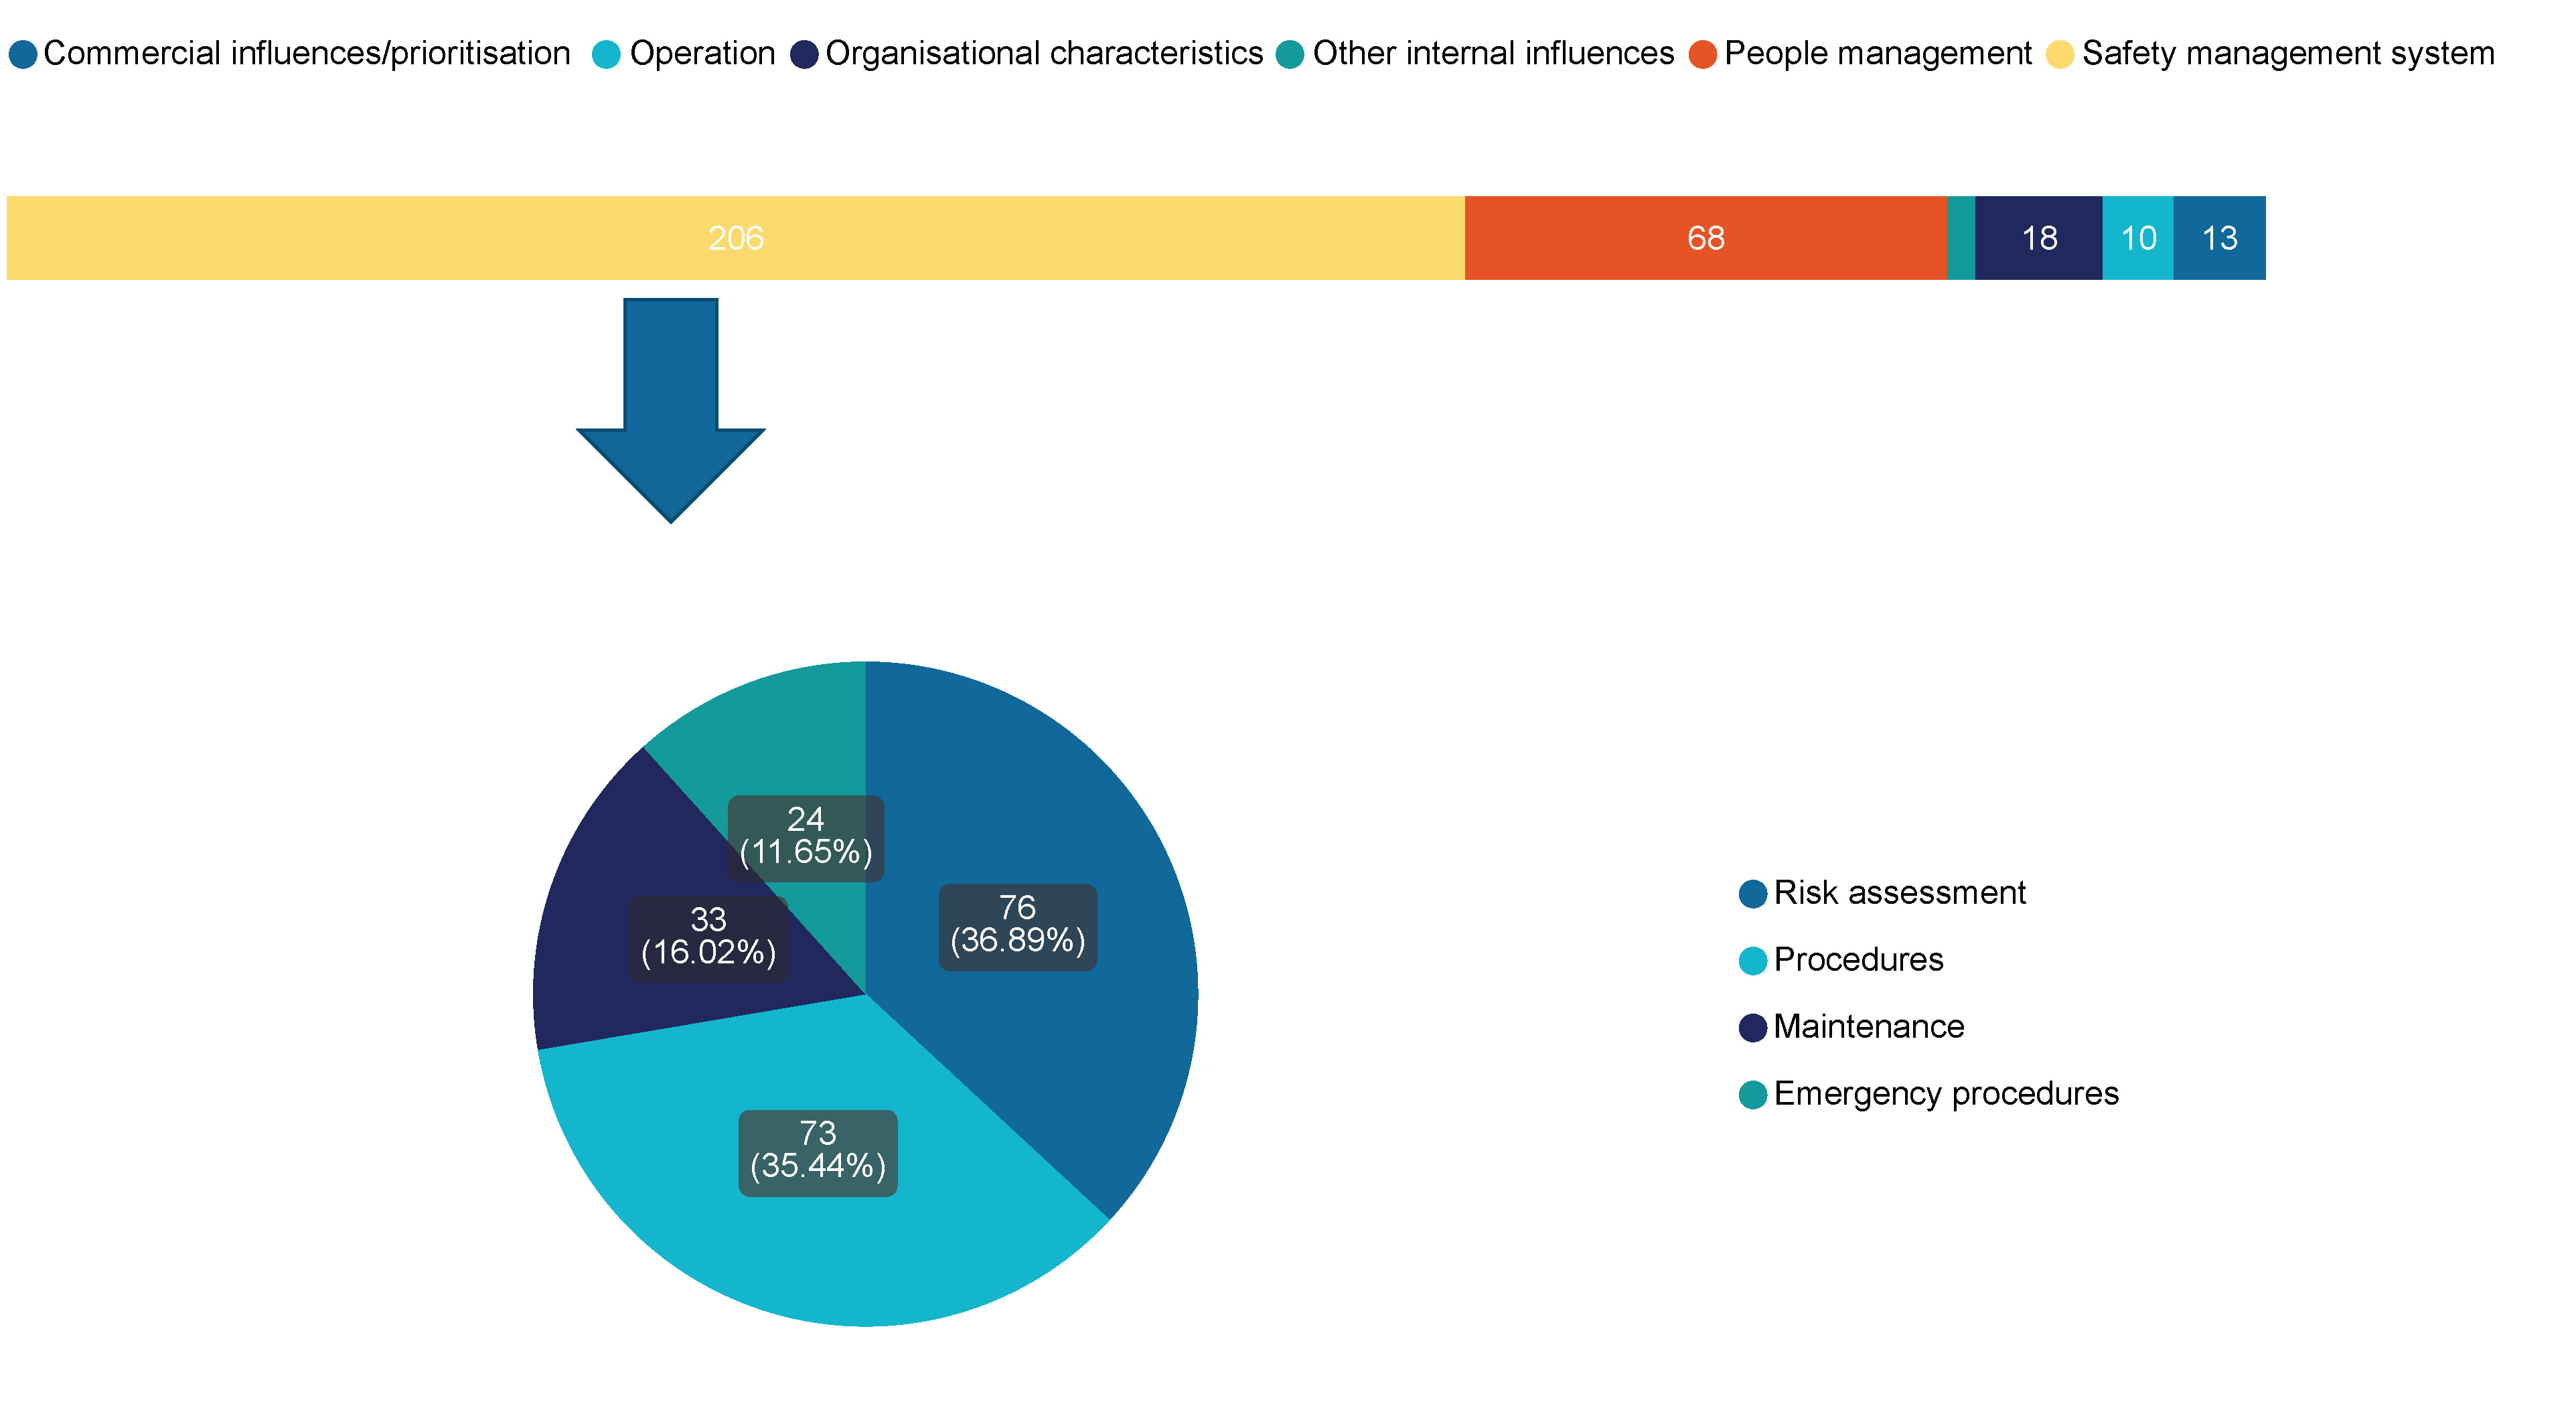 Figure 24 Breakdown of internal organisational categories with a safety management processes (2020-2023)